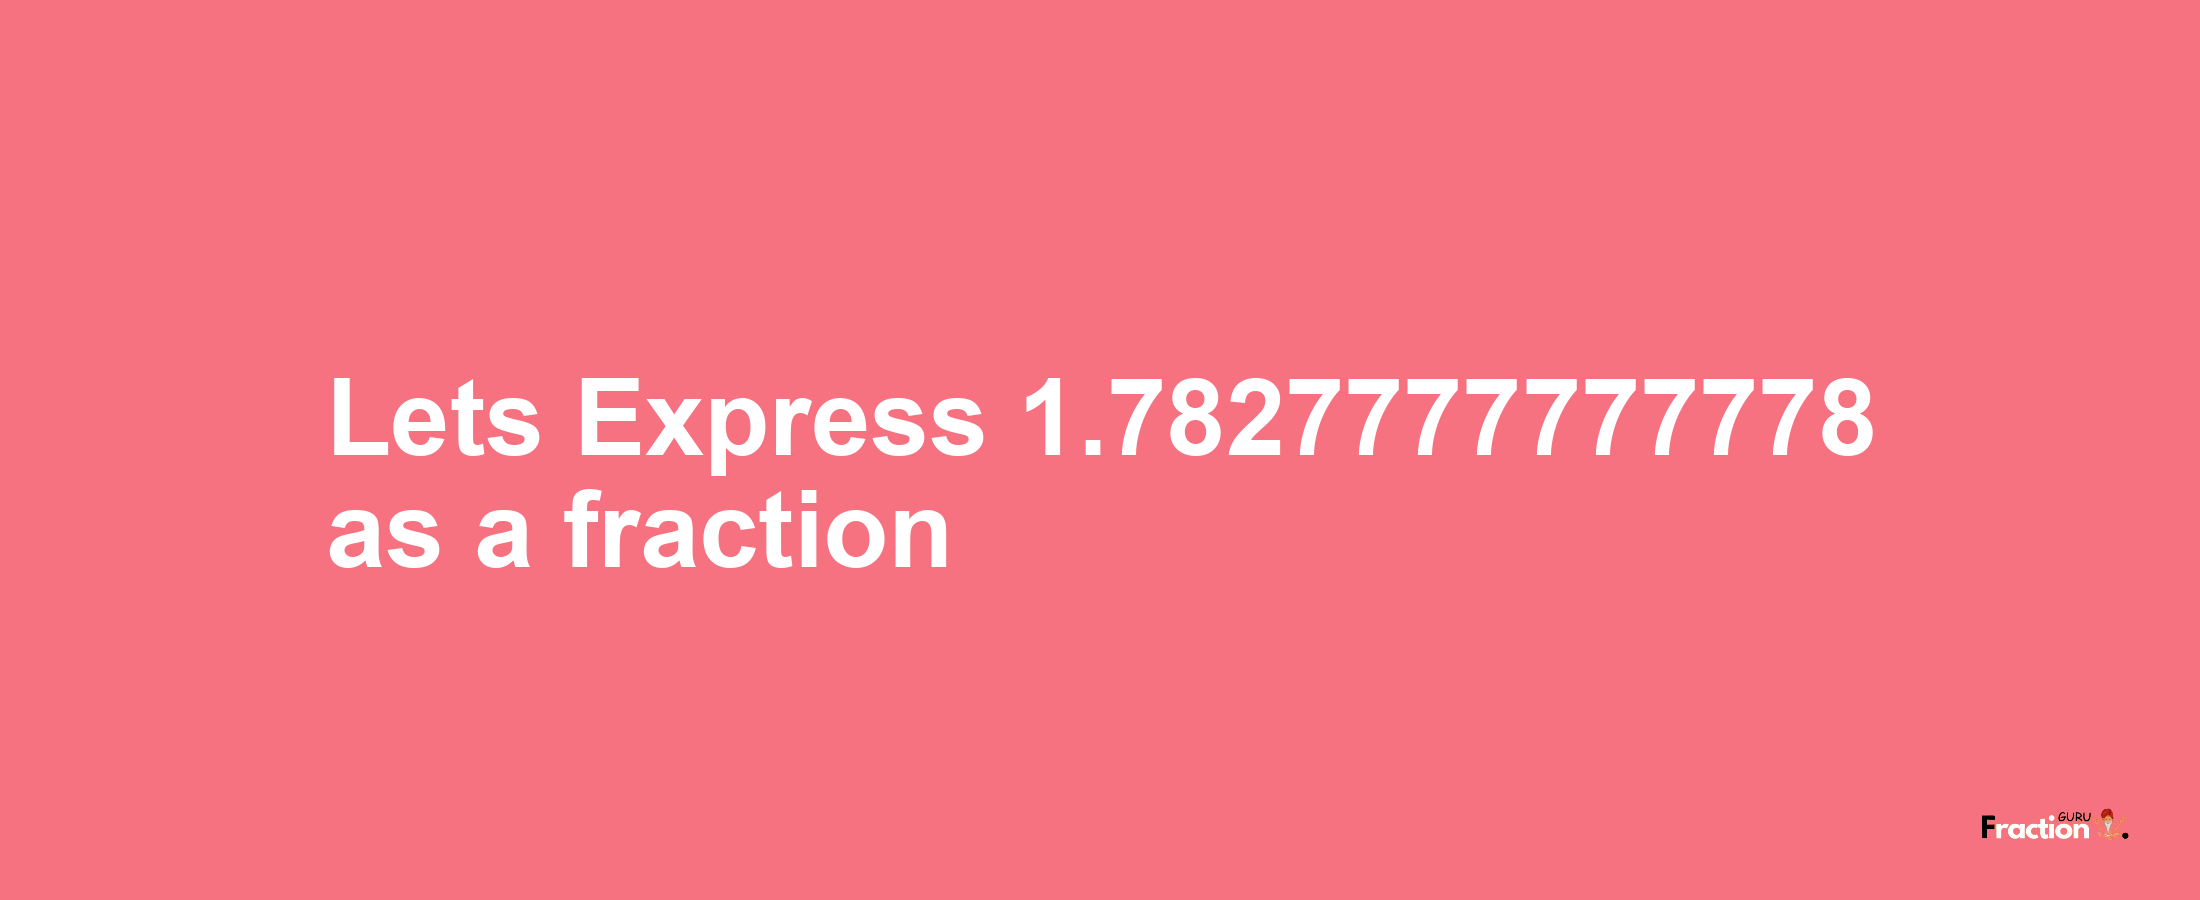 Lets Express 1.7827777777778 as afraction